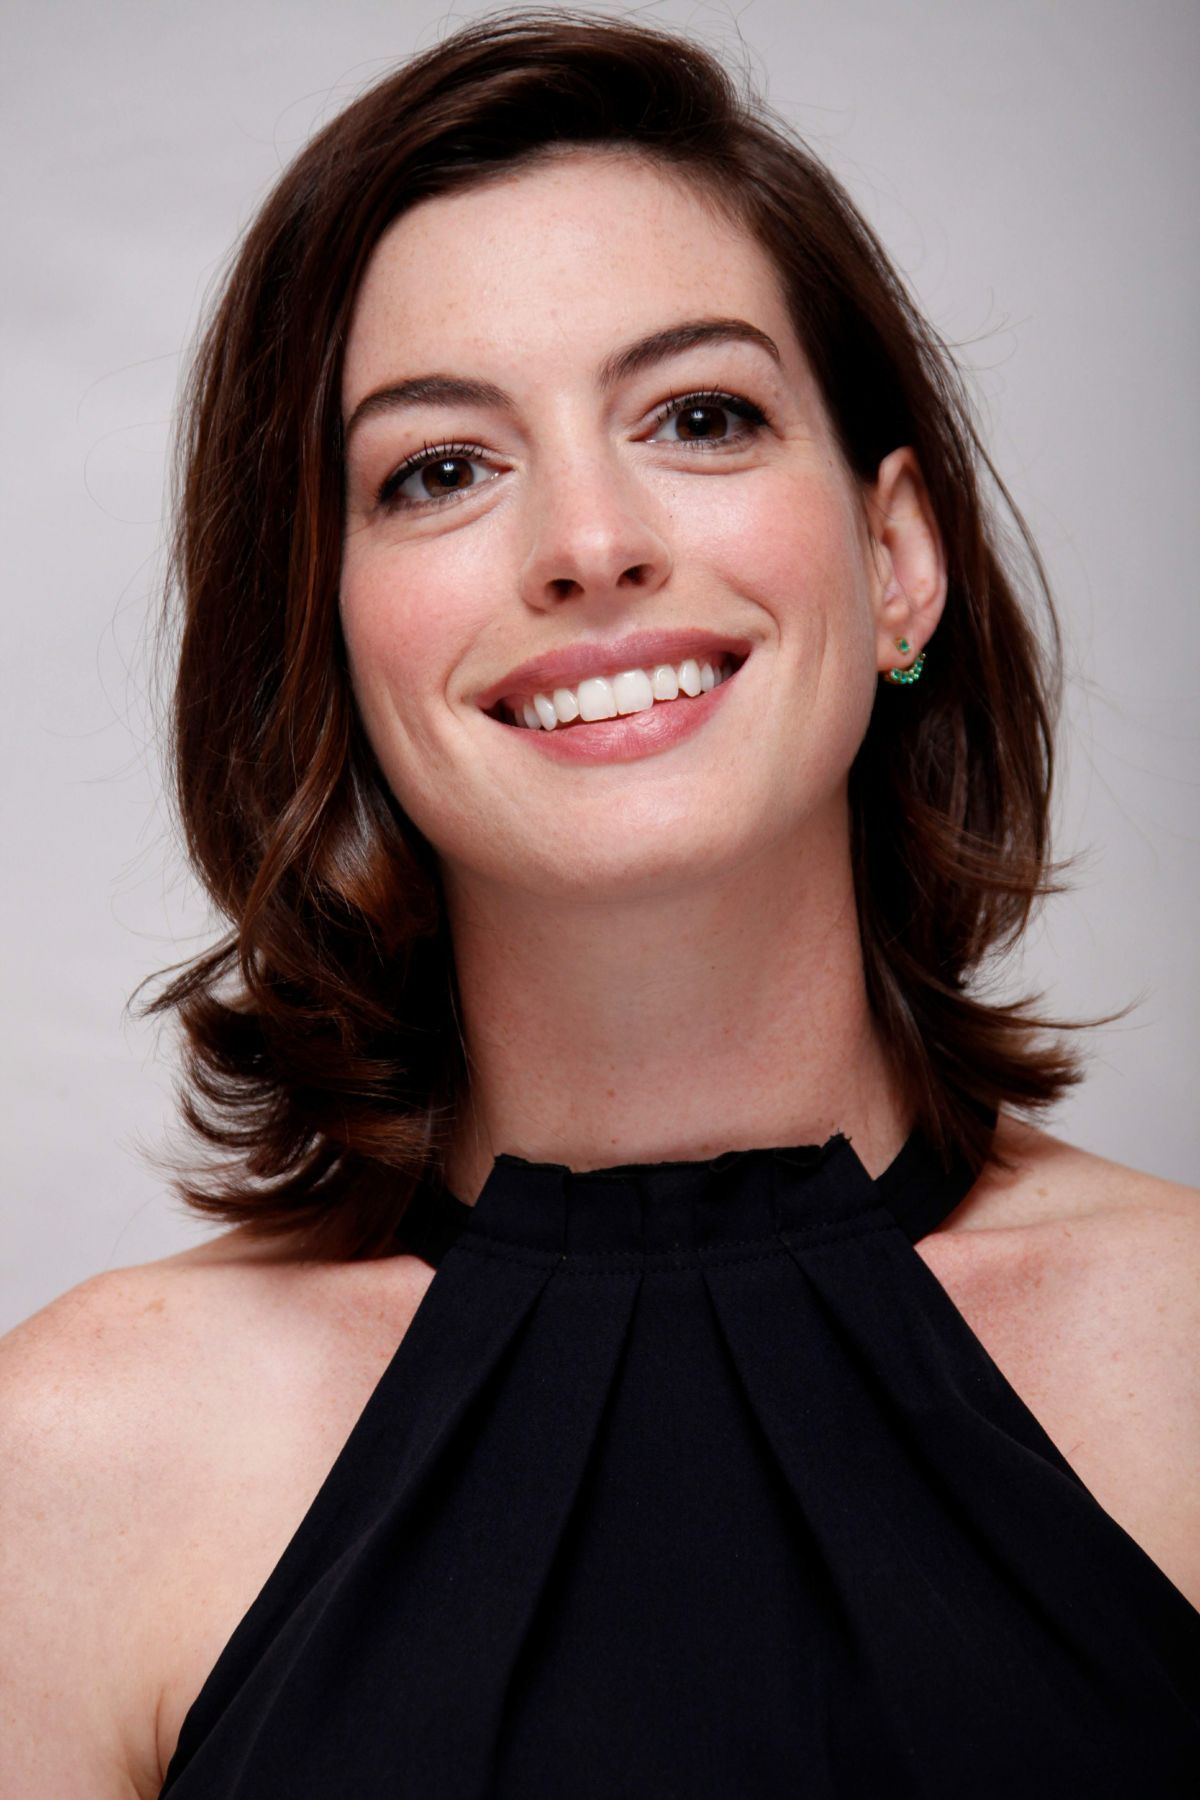 Anne Hathaway wallpaper, Celebrity, HQ Anne Hathaway picture